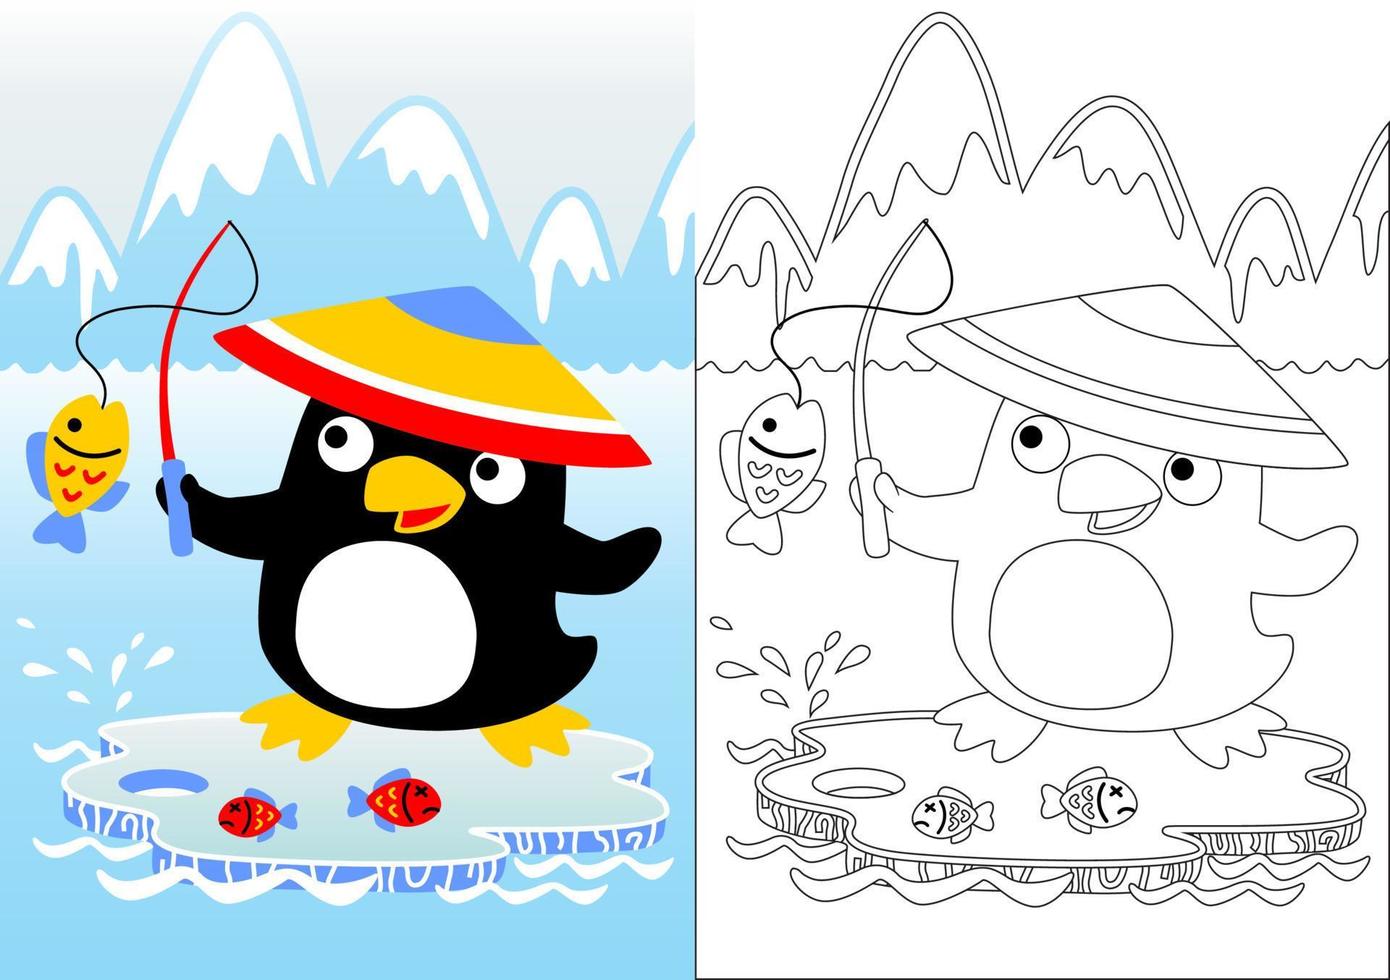 Funny penguin fishing, Vector cartoon illustration, coloring book or page